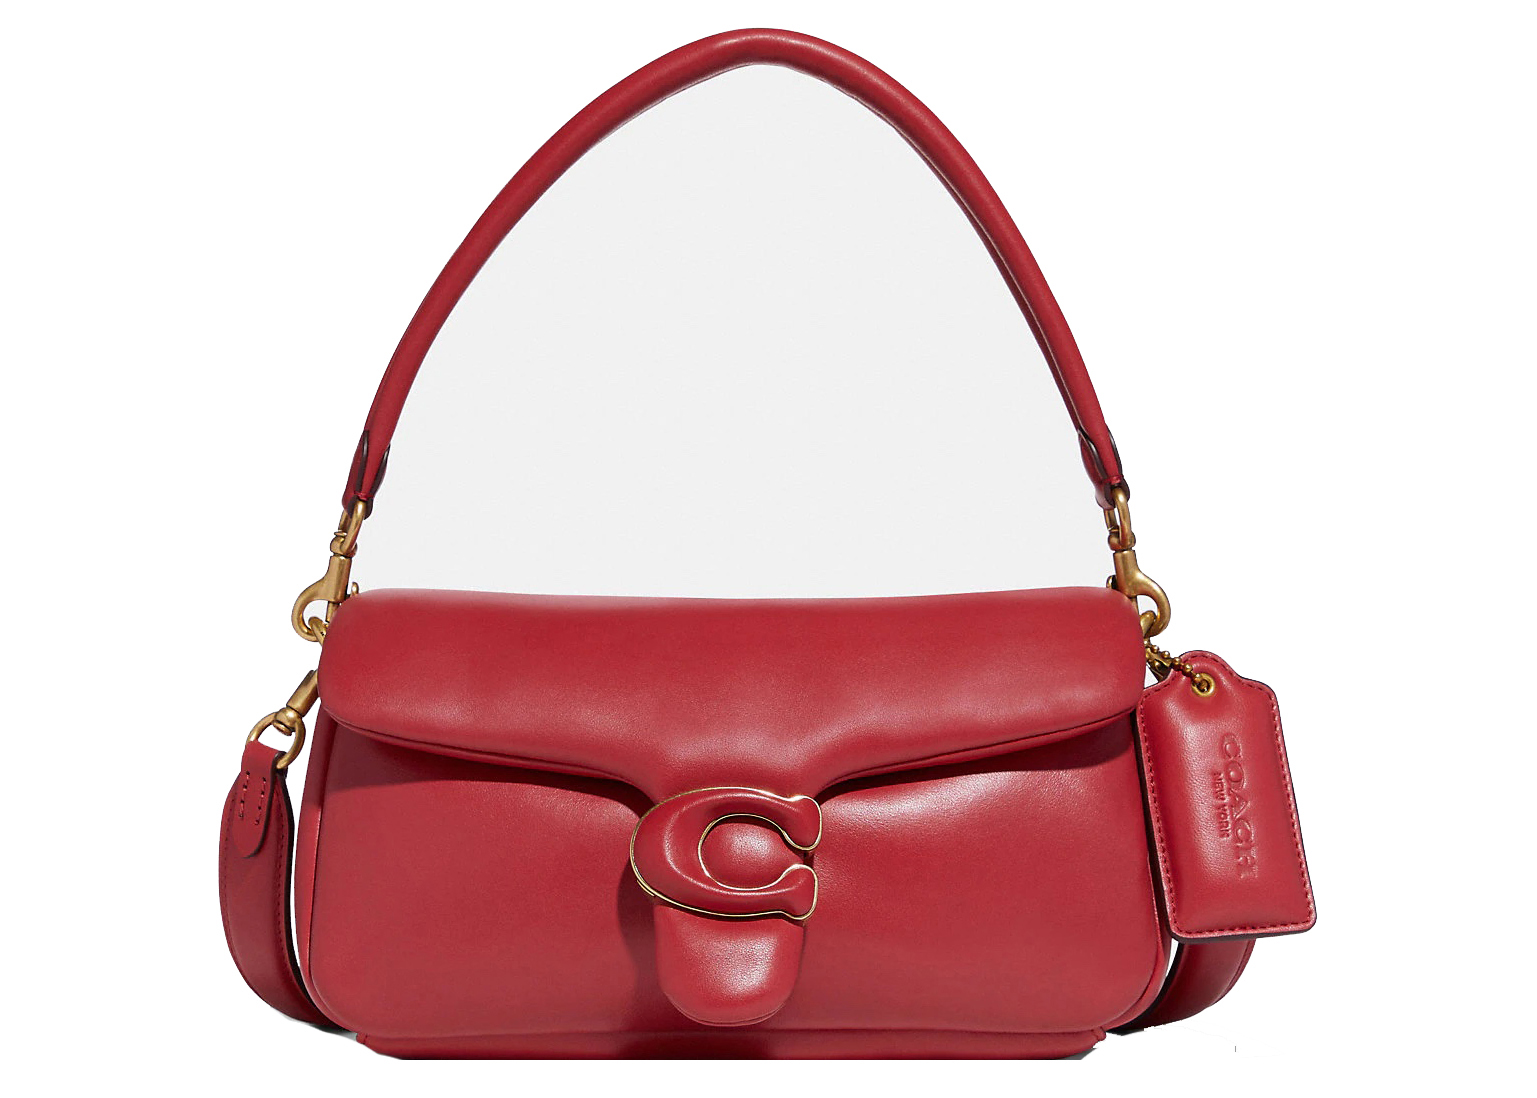 Coach Wallet Red - $159 (40% Off Retail) New With Tags - From Aya